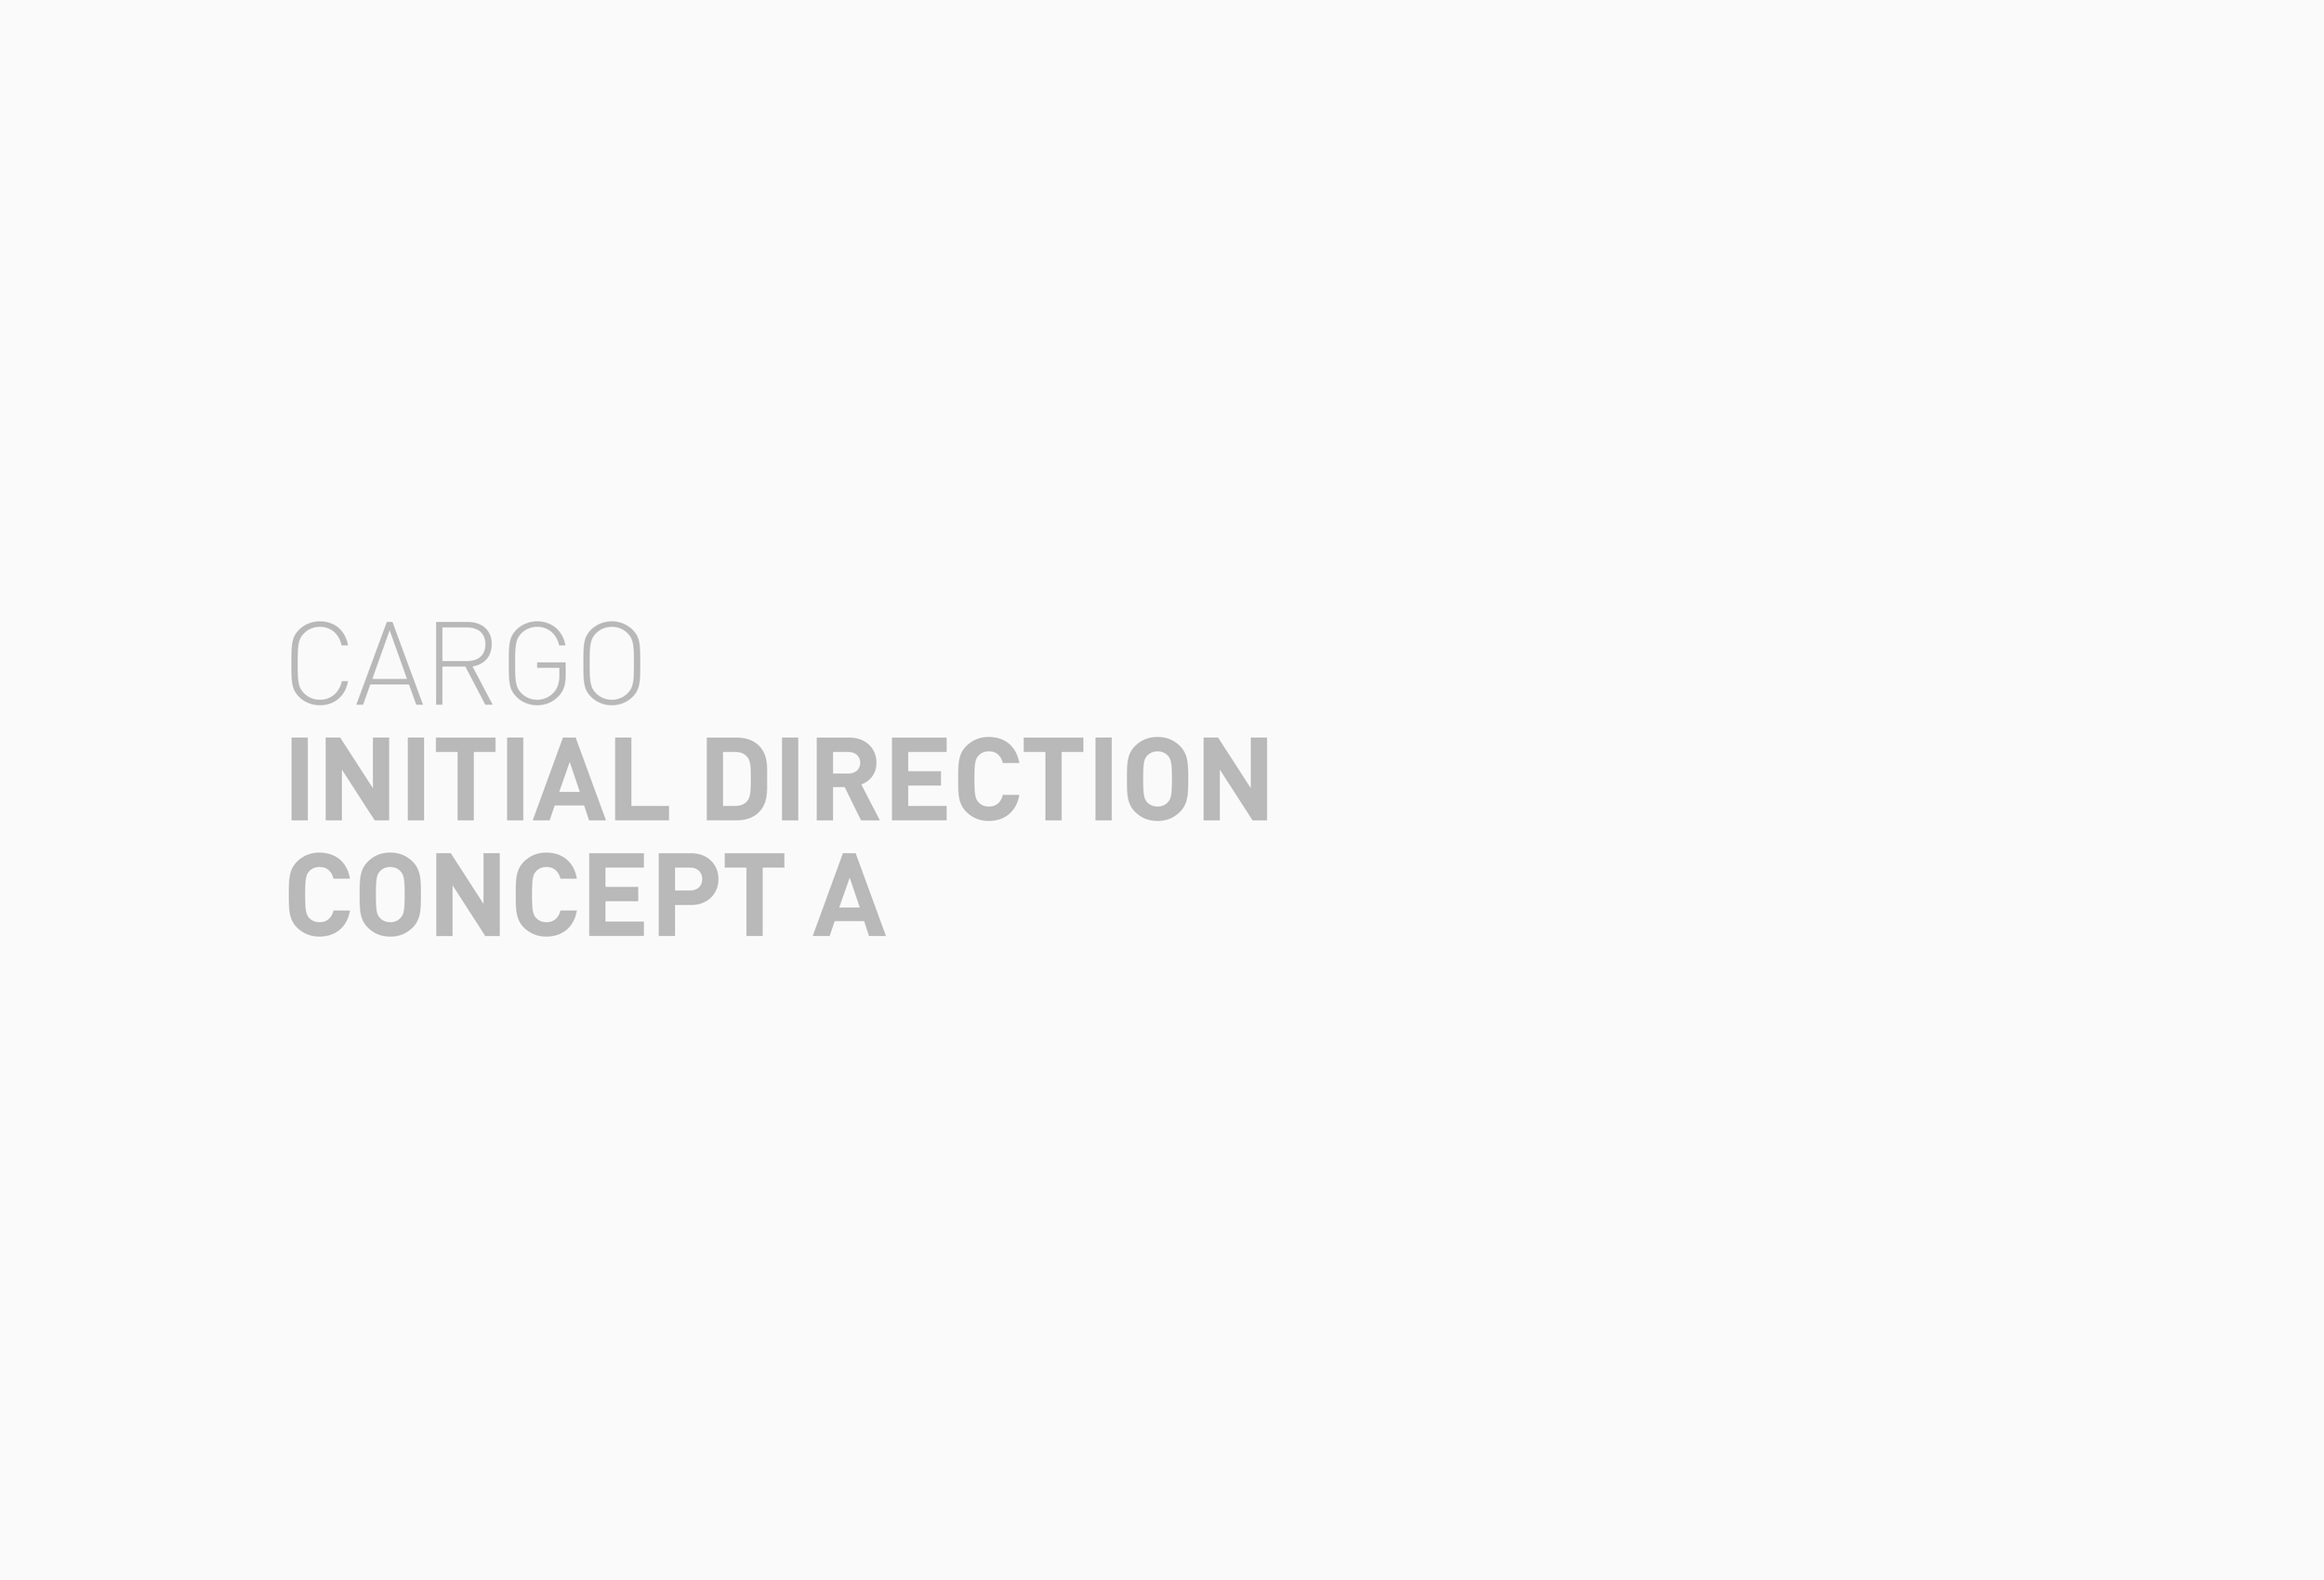  Following are four directions for Cargo’s new look. Each with subtle, yet&nbsp;defining differences,&nbsp;designed to&nbsp;reach Cargo's intended audience. The final Cargo rebrand is the love child of these initial concept directions.&nbsp; 